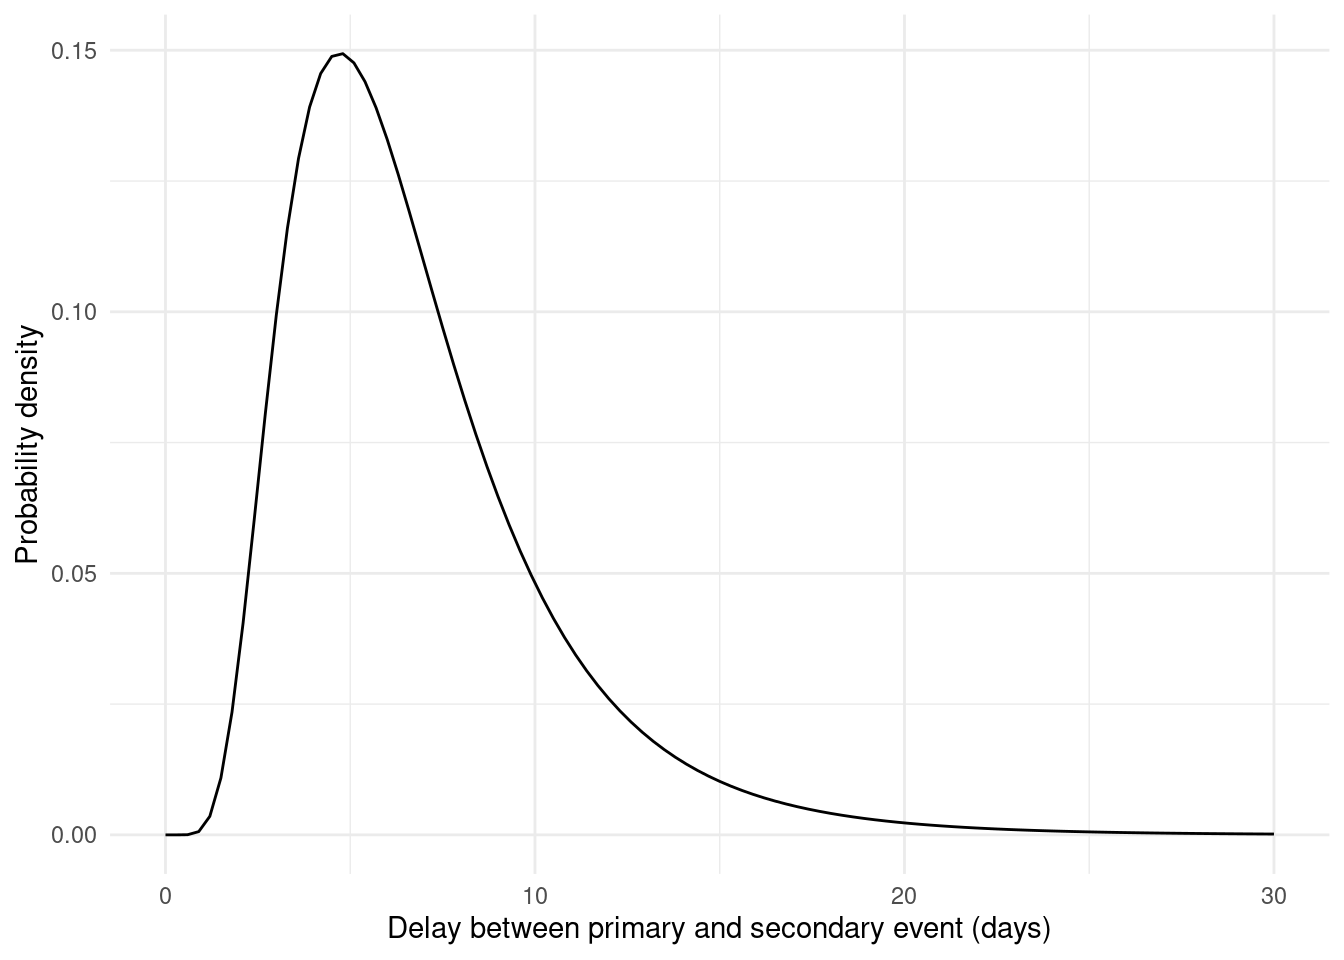 The lognormal distribution is skewed to the right. Long delay times still have some probability.